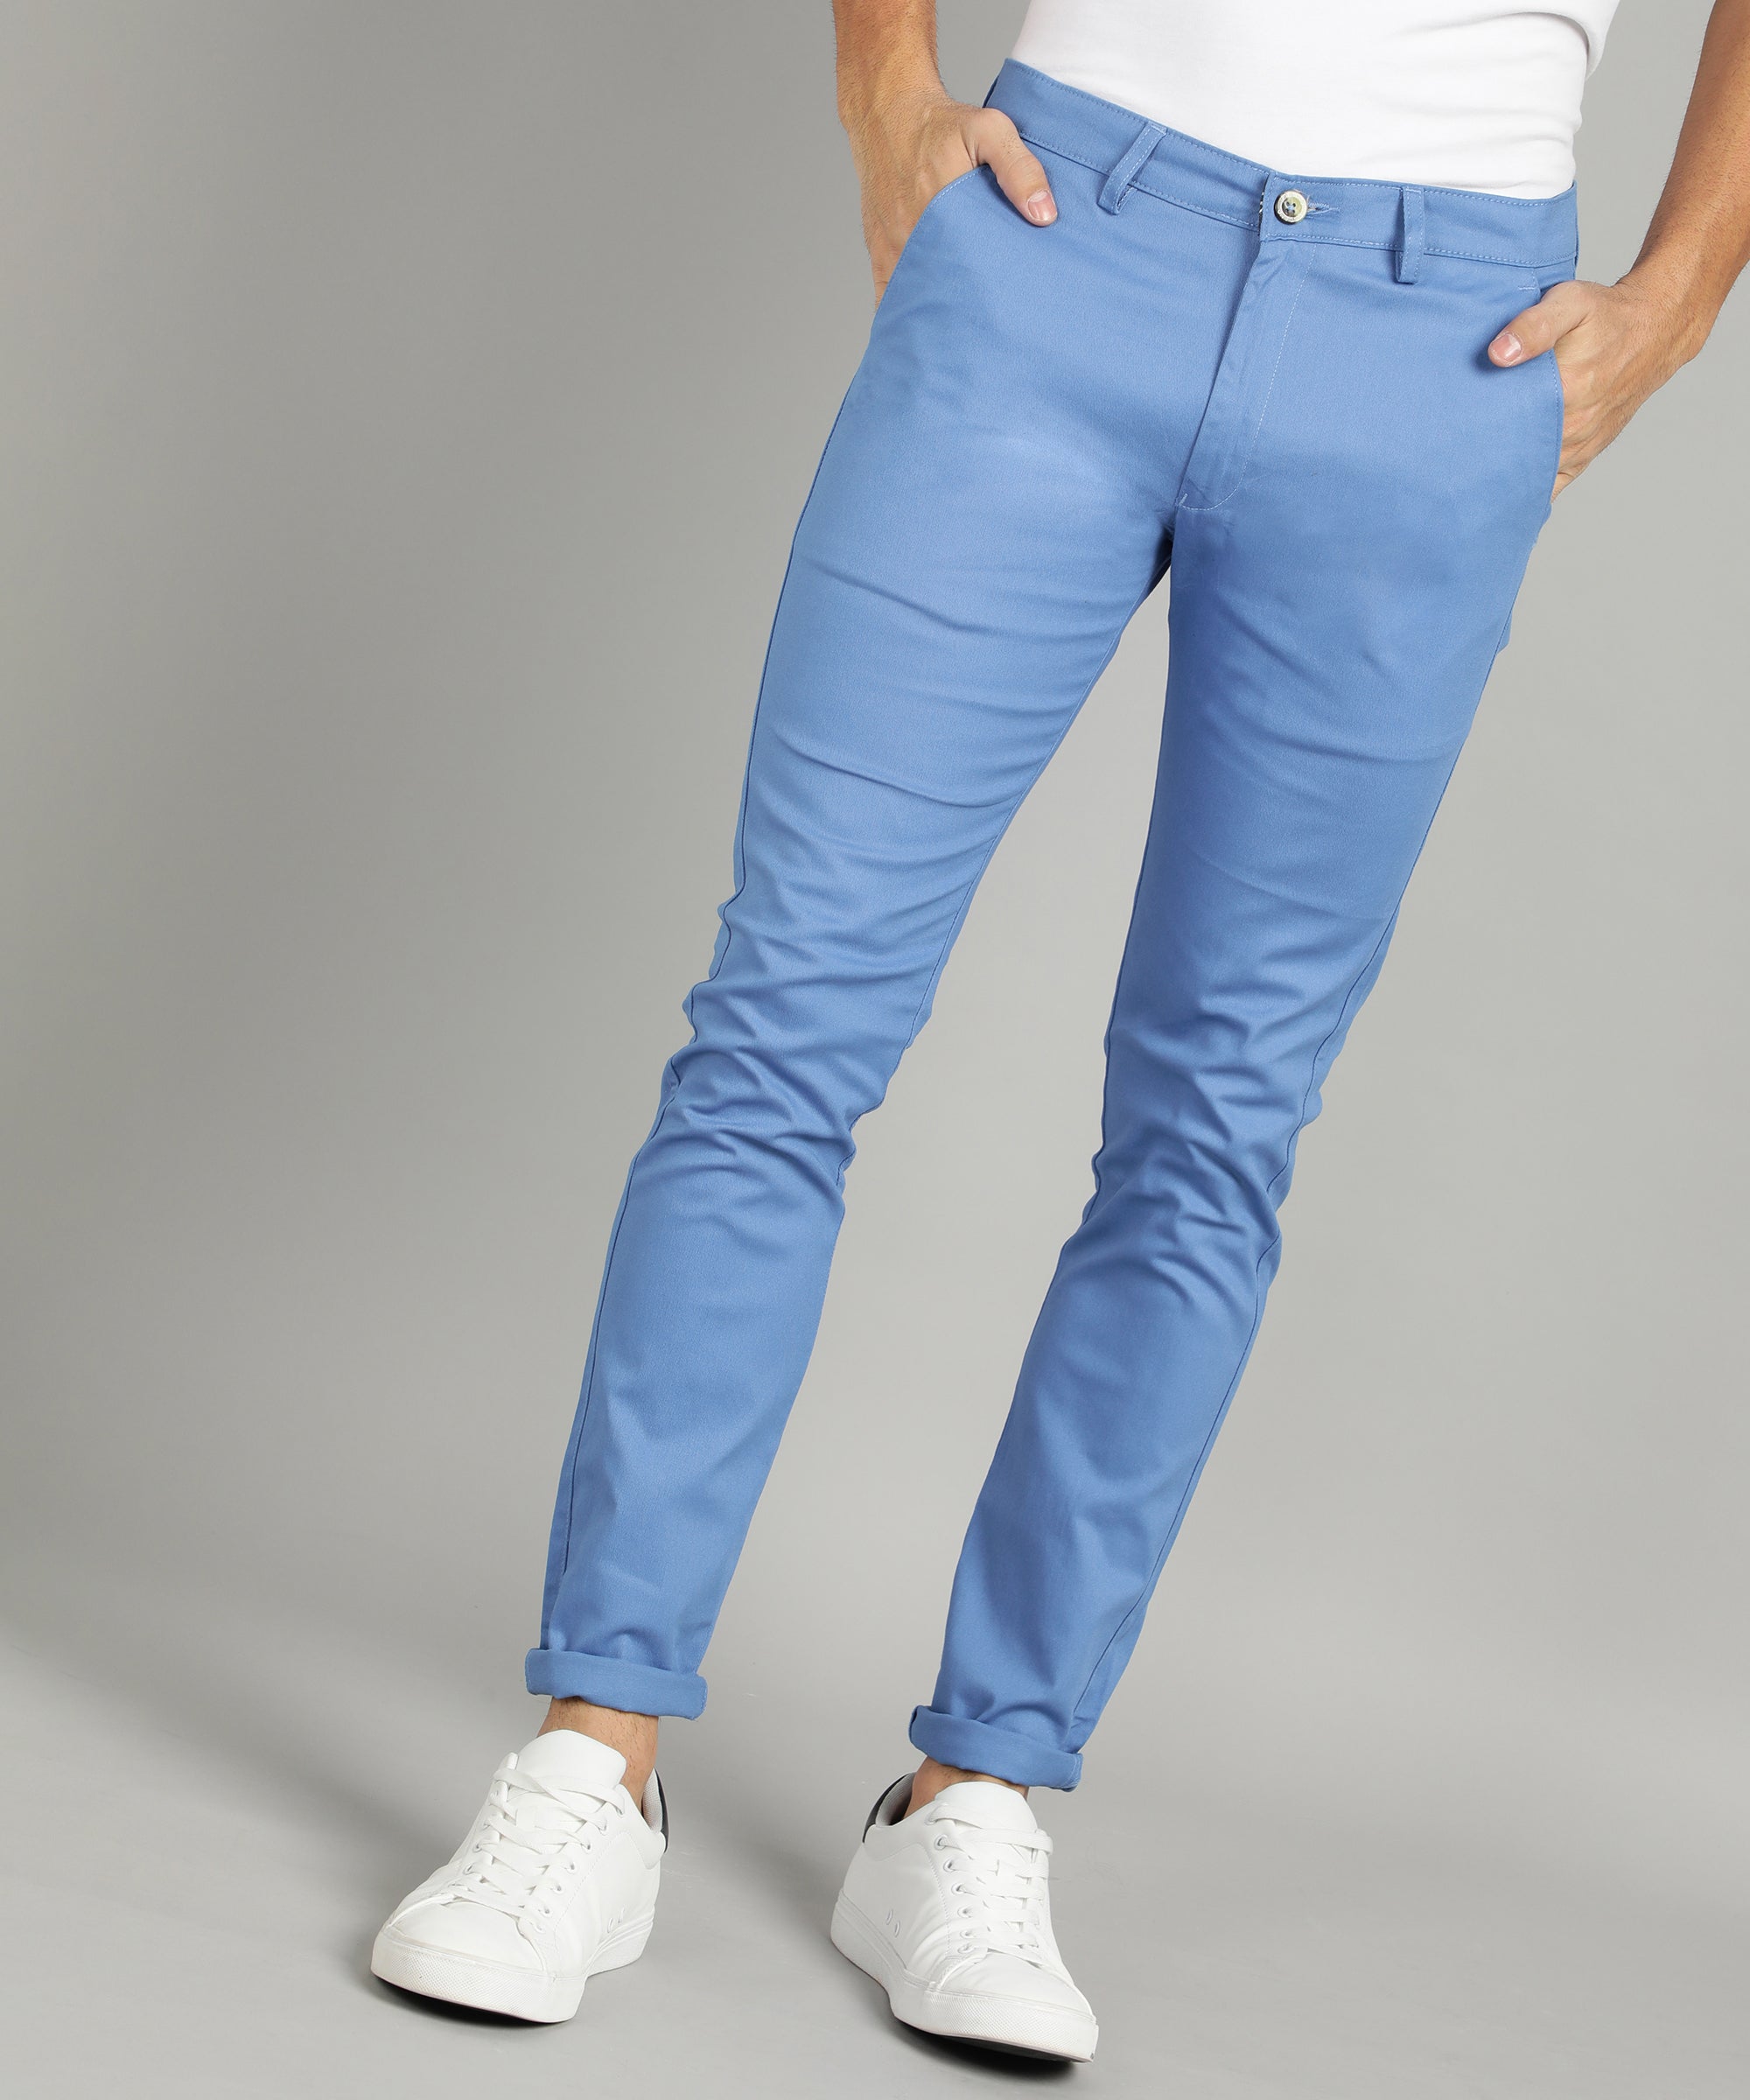 Men's Sky Blue Cotton Slim Fit Casual Chinos Trousers Stretch